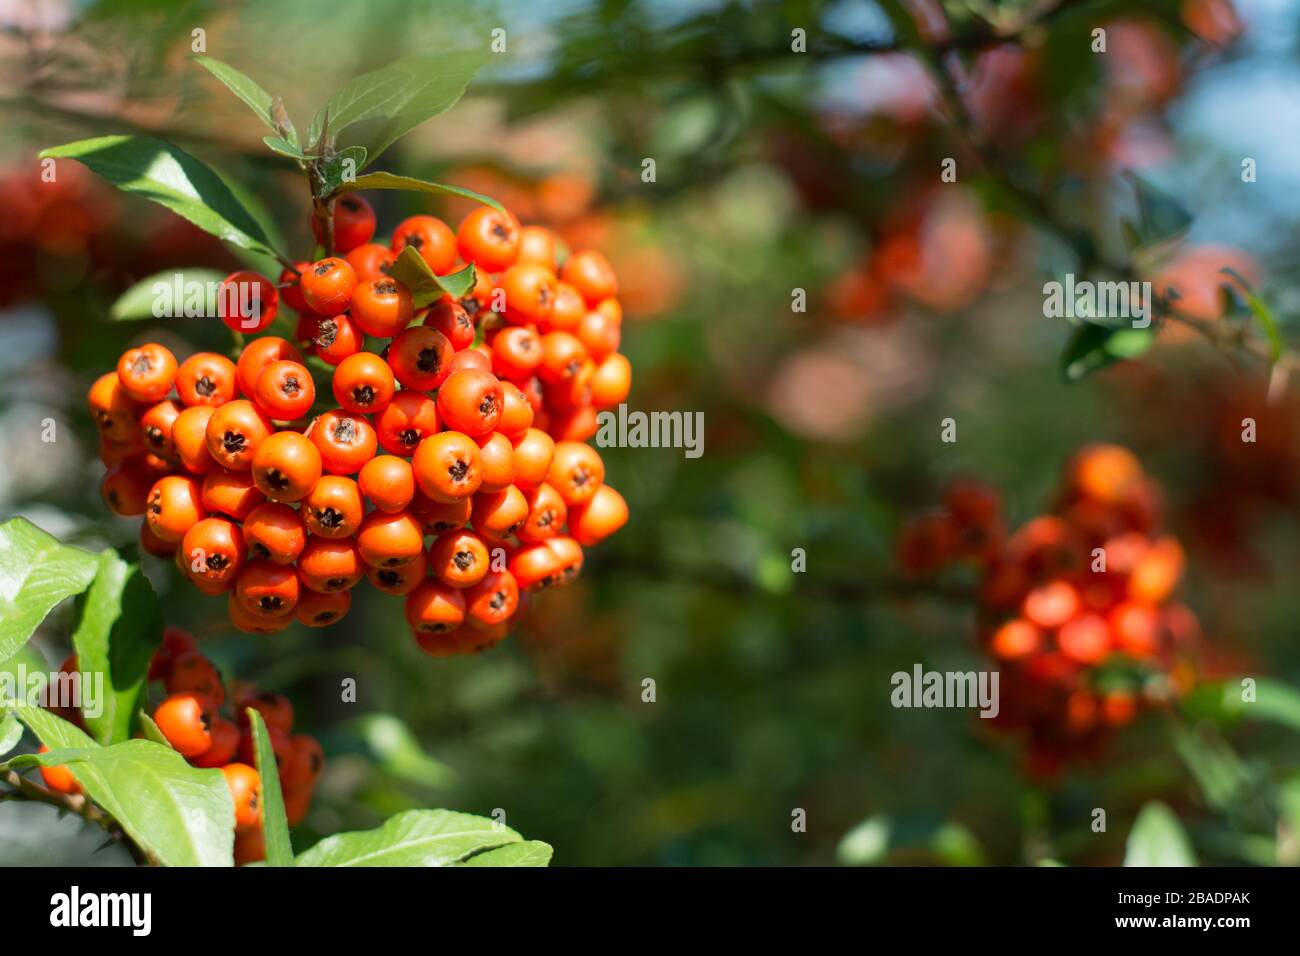 Bunch of orange firethorn berries surrounded with green leaves - blurred background Stock Photo